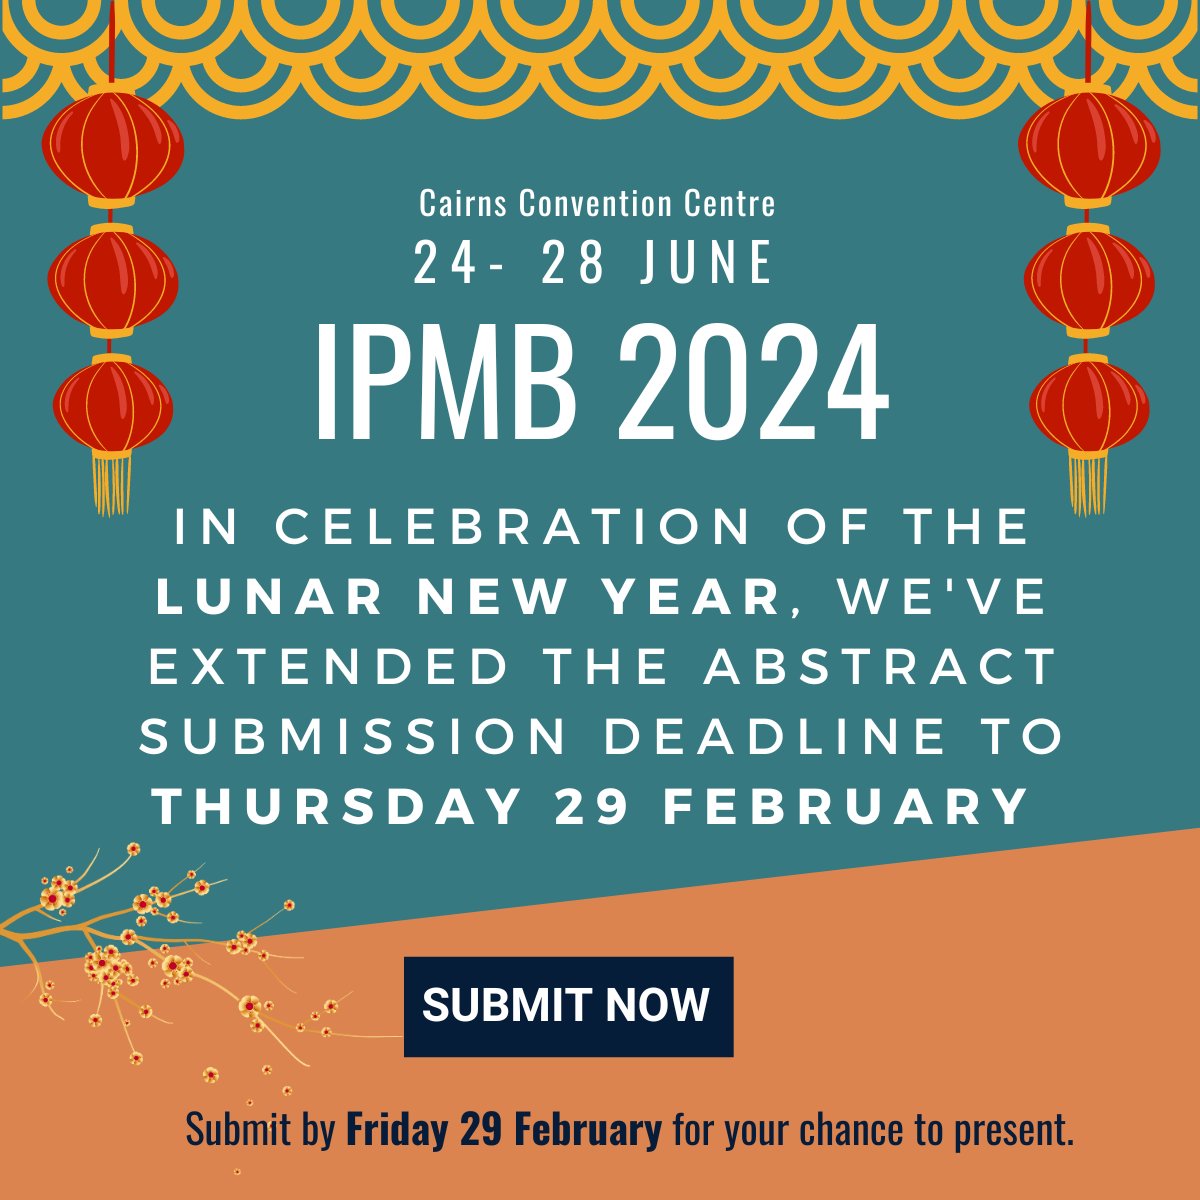 In celebration of the Lunar New Year the #IPMB2024 abstract submissions deadline has been extended to 29 February! There’s still time to submit, visit ipmb2024.org for more information.